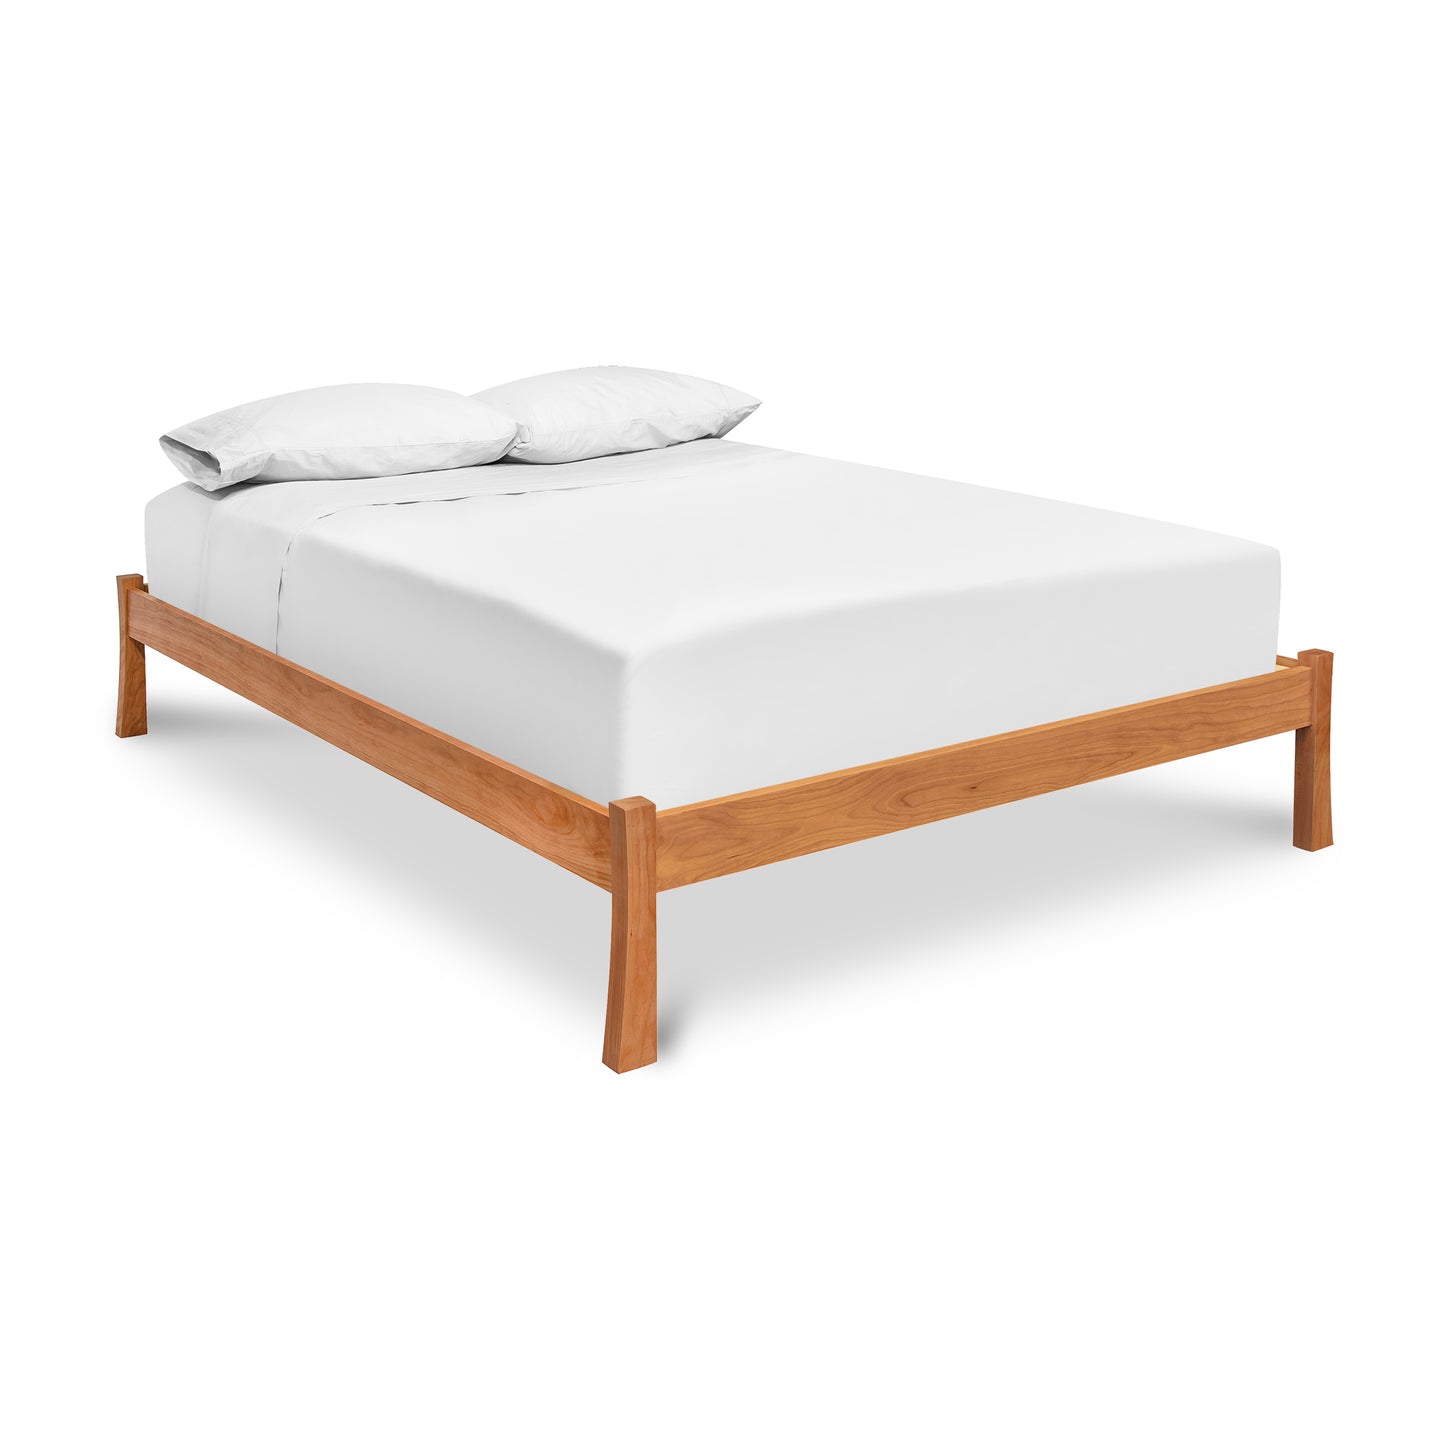 A simple Vermont Furniture Designs Contemporary Craftsman Studio-Style Platform Bed frame, crafted from sustainably sourced hardwood with an eco-friendly oil finish, complete with a white fitted sheet, white flat sheet, and two pillows.